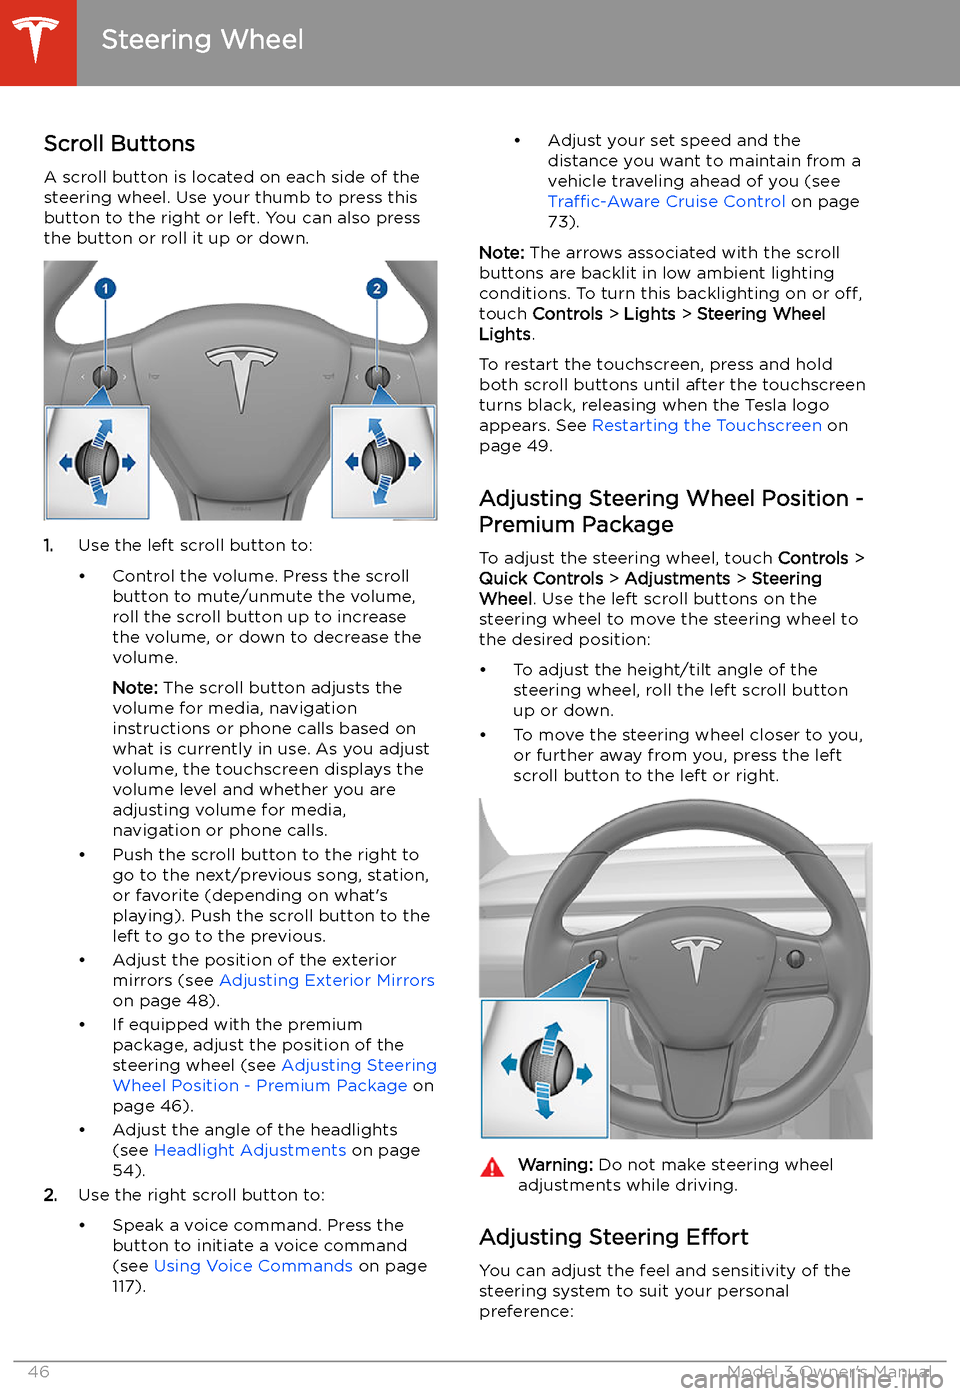 TESLA MODEL 3 2019  Owners Manual (Europe) Steering Wheel
Scroll Buttons
A scroll button is located on each side of the
steering wheel. Use your thumb to press this
button to the right or left. You can also press
the button or roll it up or do